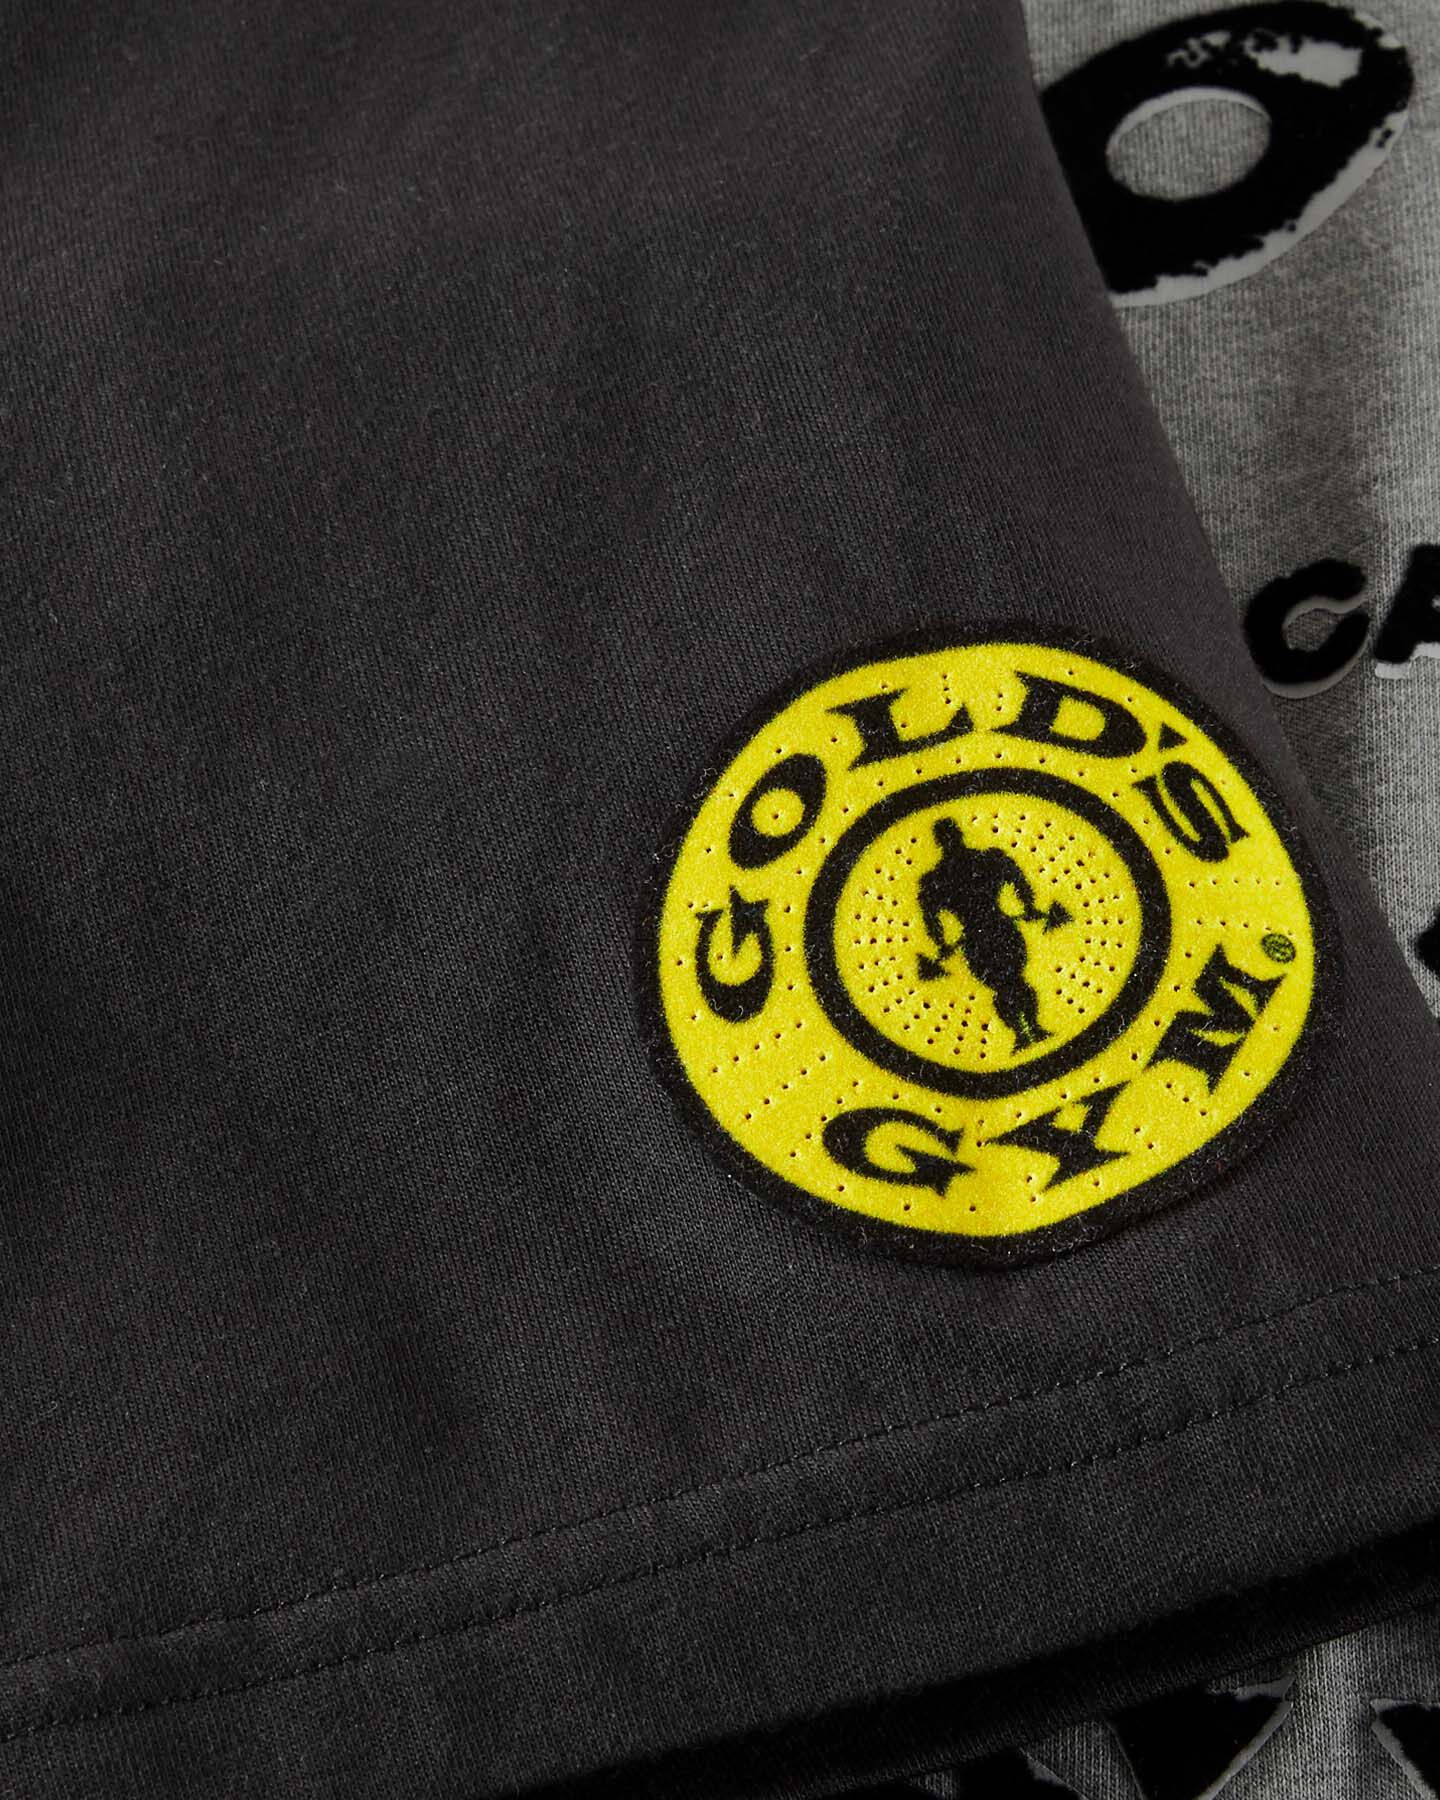  T-Shirt PUMA GOLD'S GYM M S5197190|01|S scatto 2